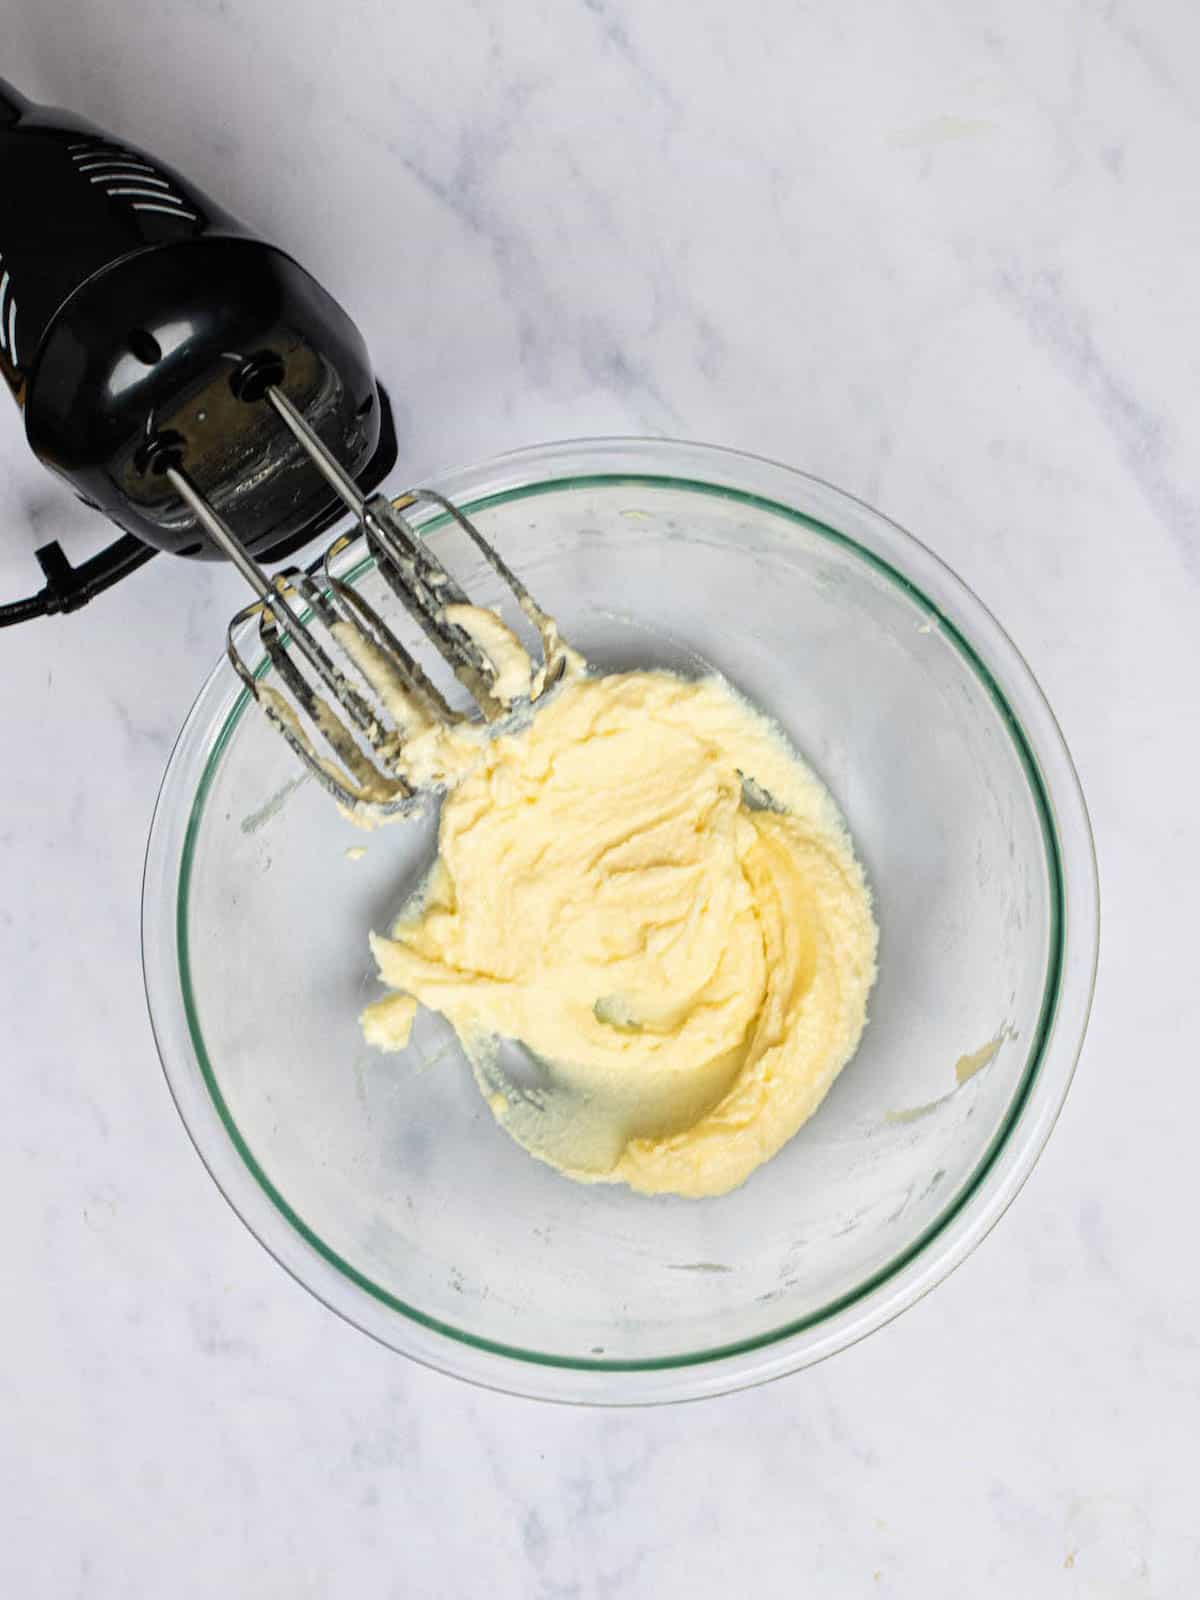 Sugar and butter combined in a glass bowl with hand mixer.